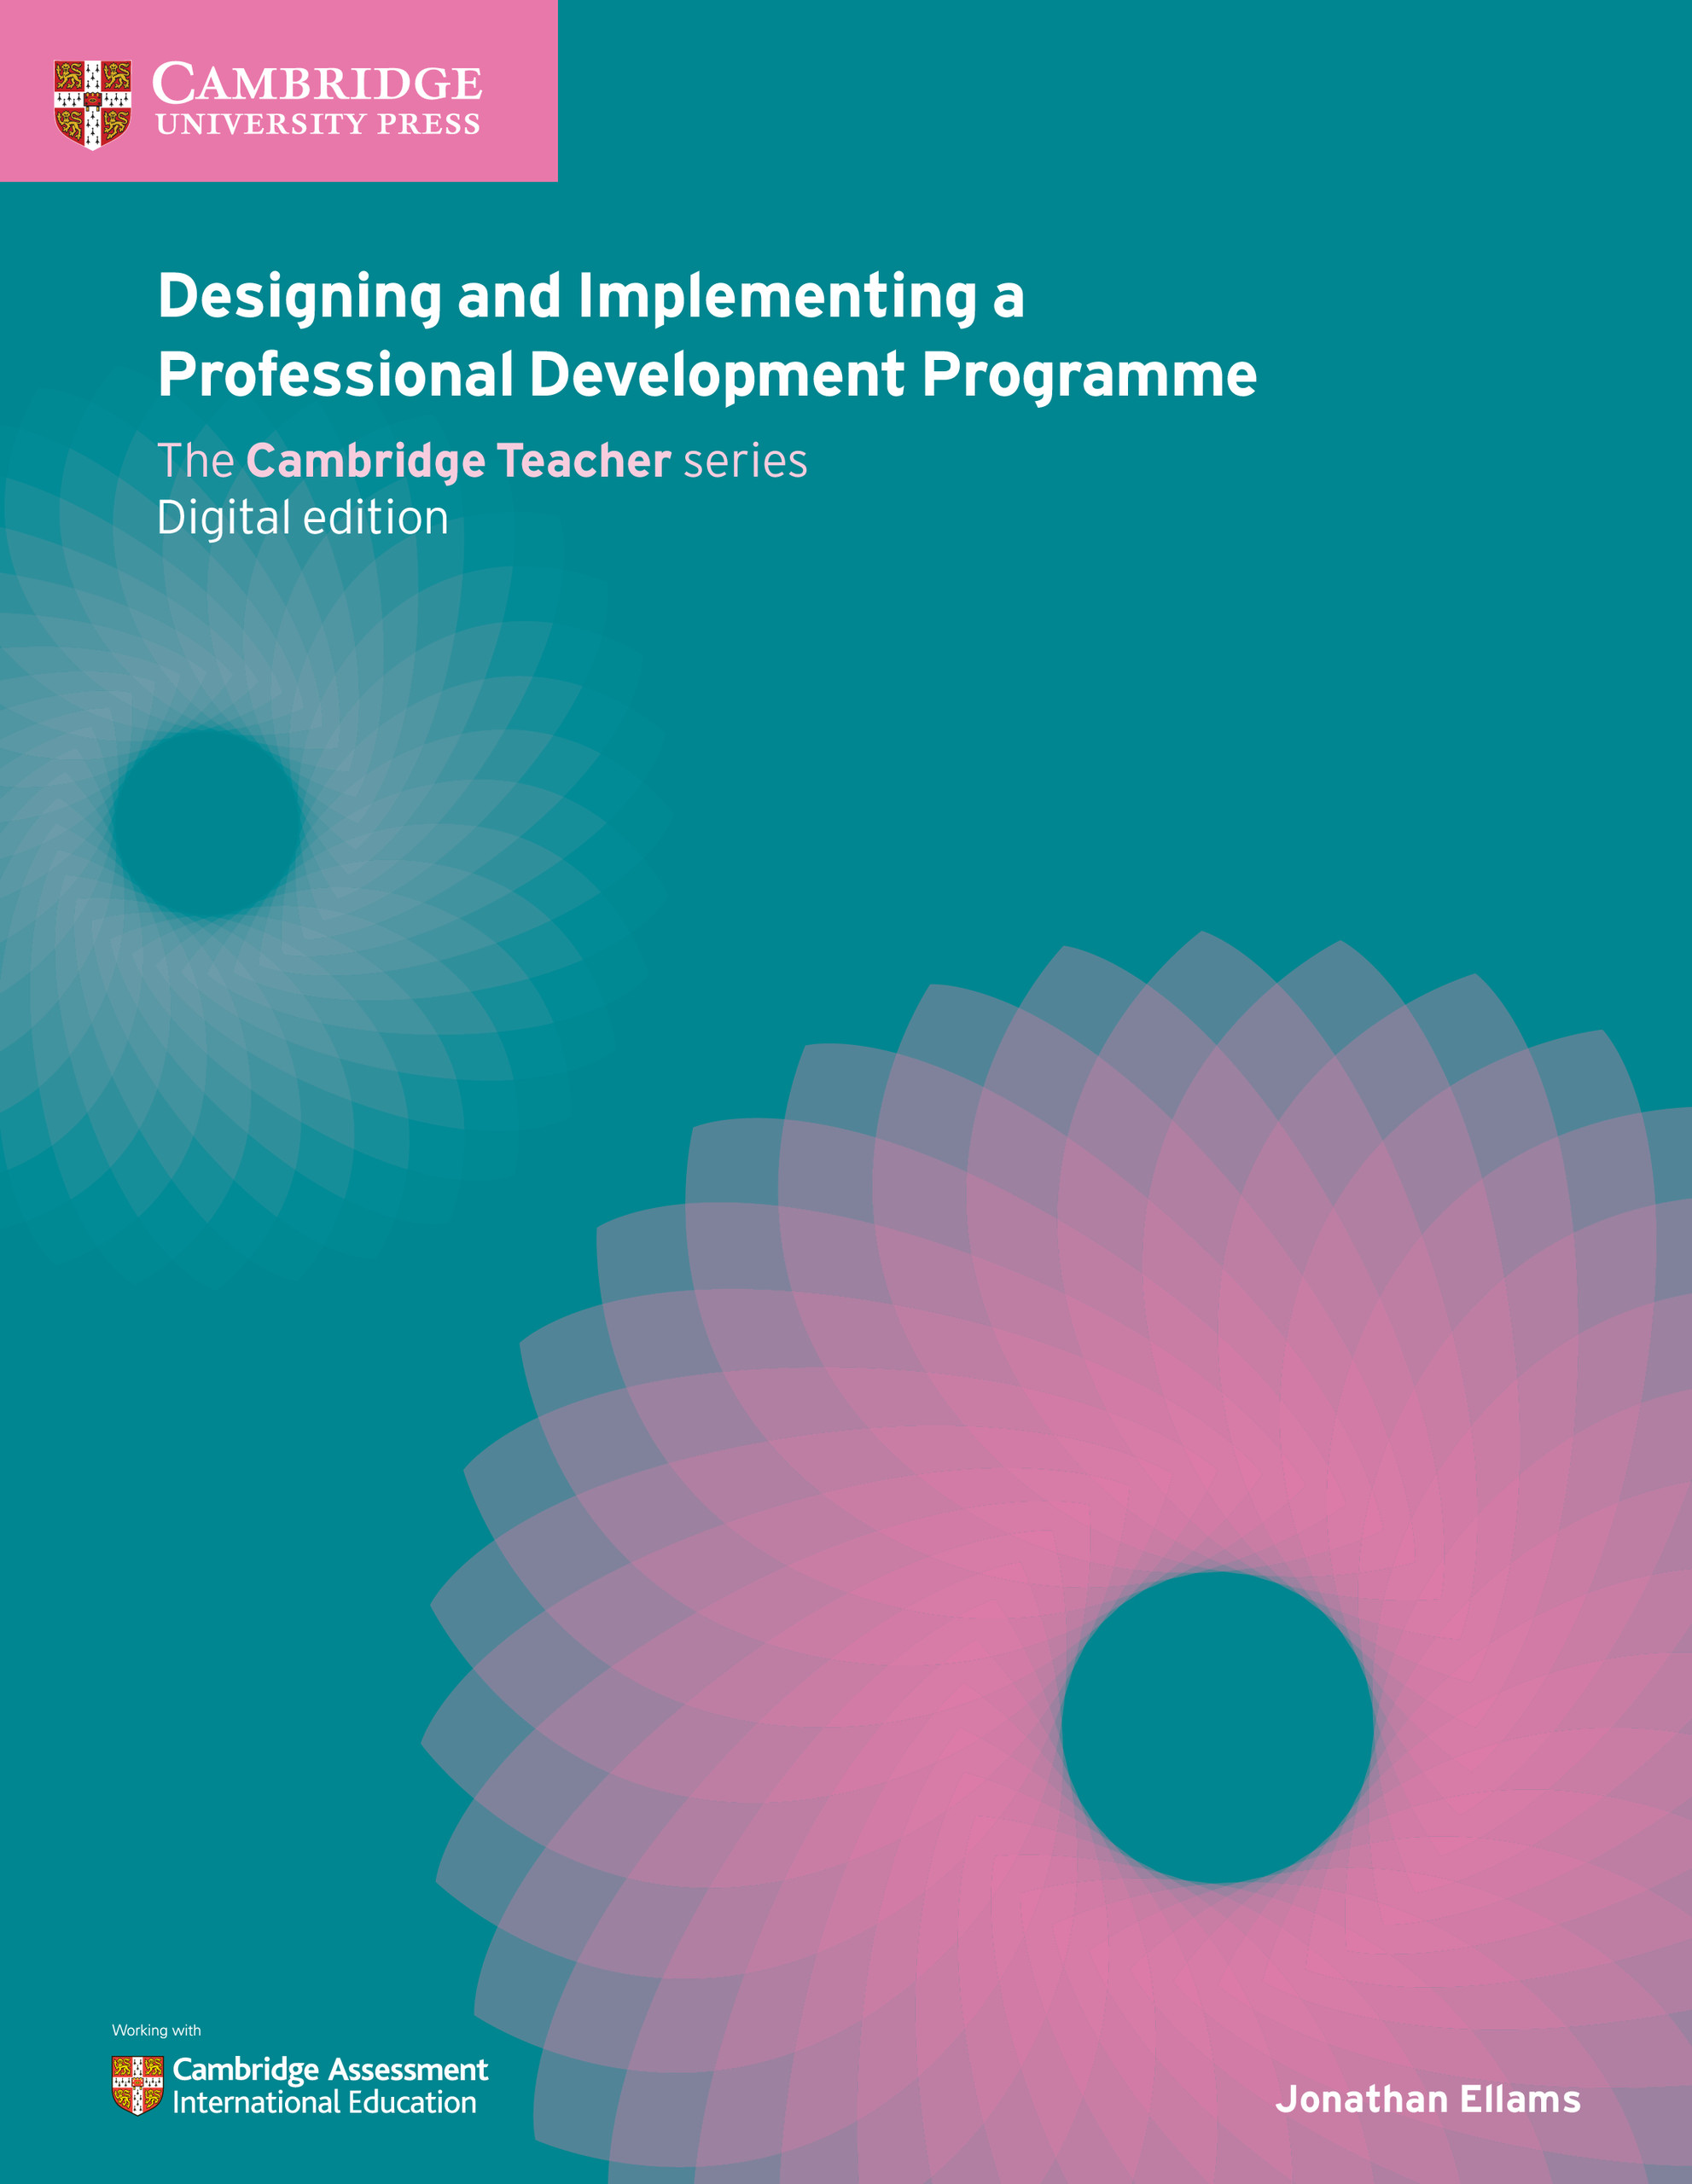 Designing and Developing a Professional Development Programme